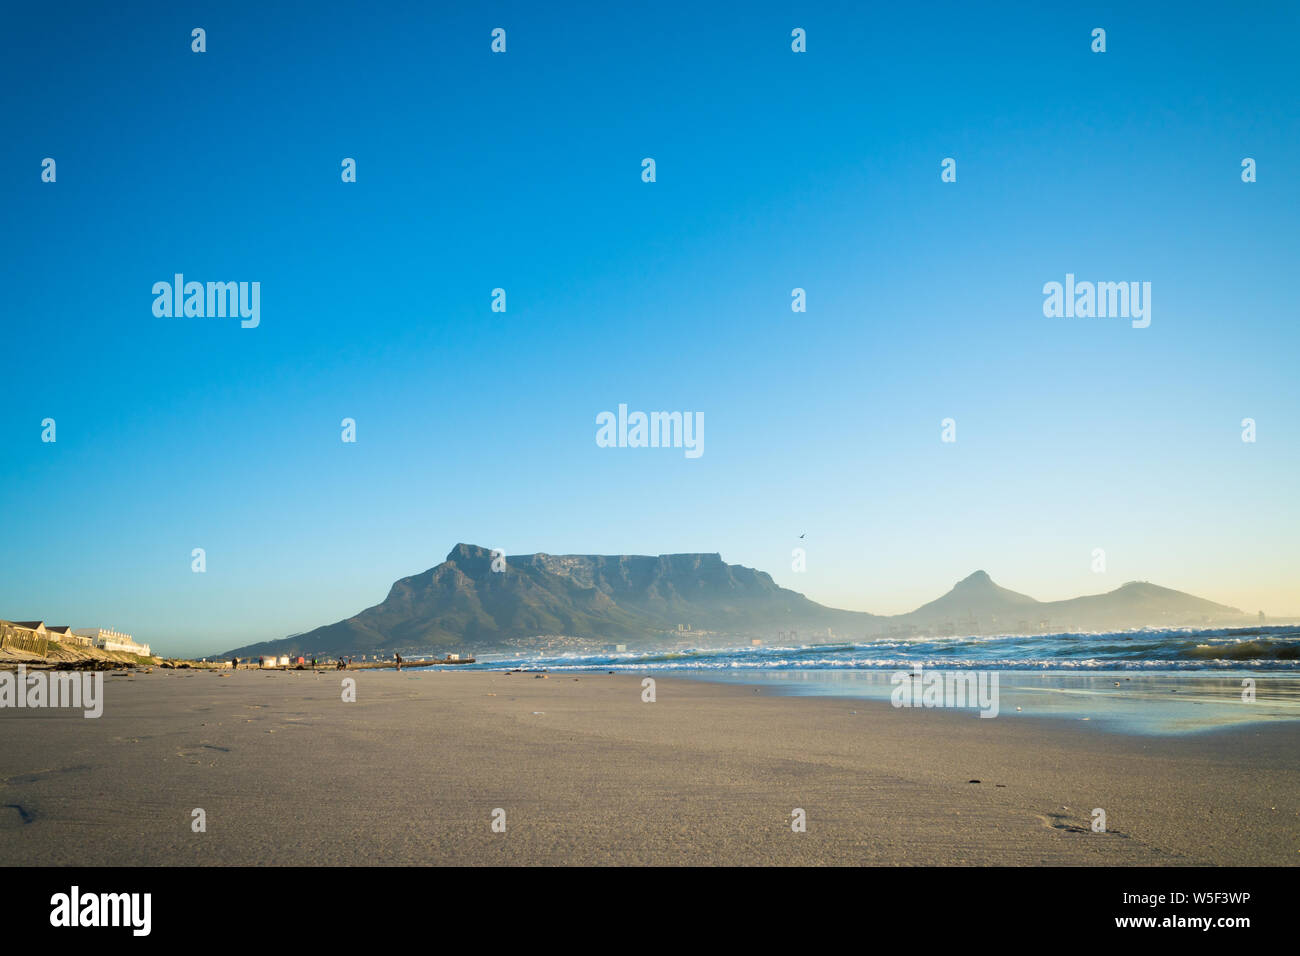 landscape scenic coastal view of Table Mountain, Lions Head and Signal Hill from the Milnerton beach at sunset or sundown in Cape Town, South Africa Stock Photo